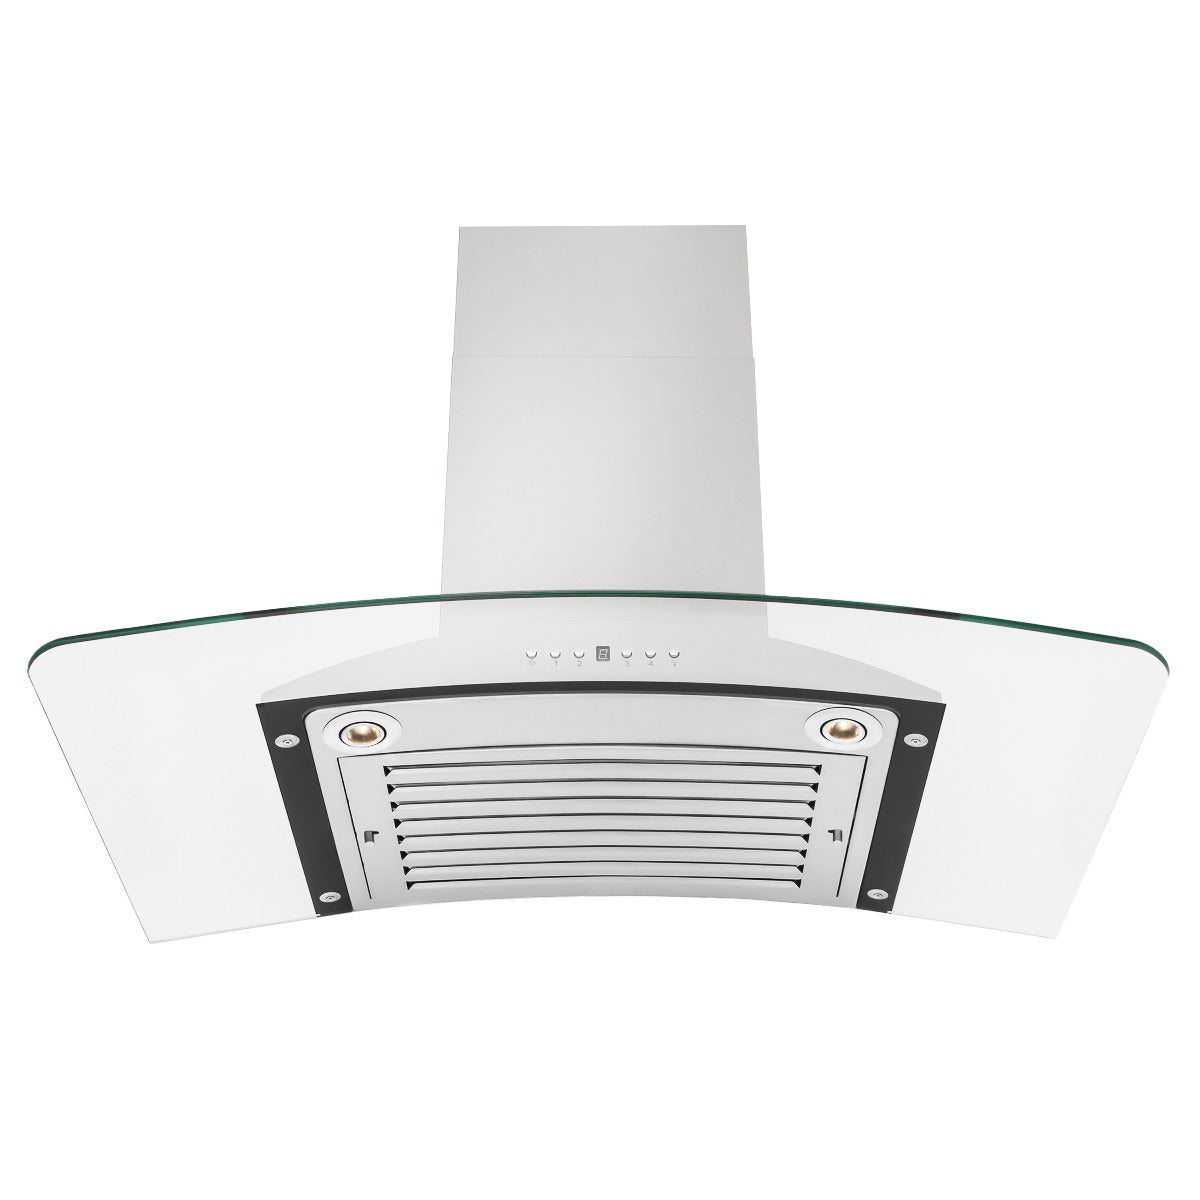 ZLINE 36 in. Convertible Vent Wall Mount Range Hood in Stainless Steel & Glass, KN-36